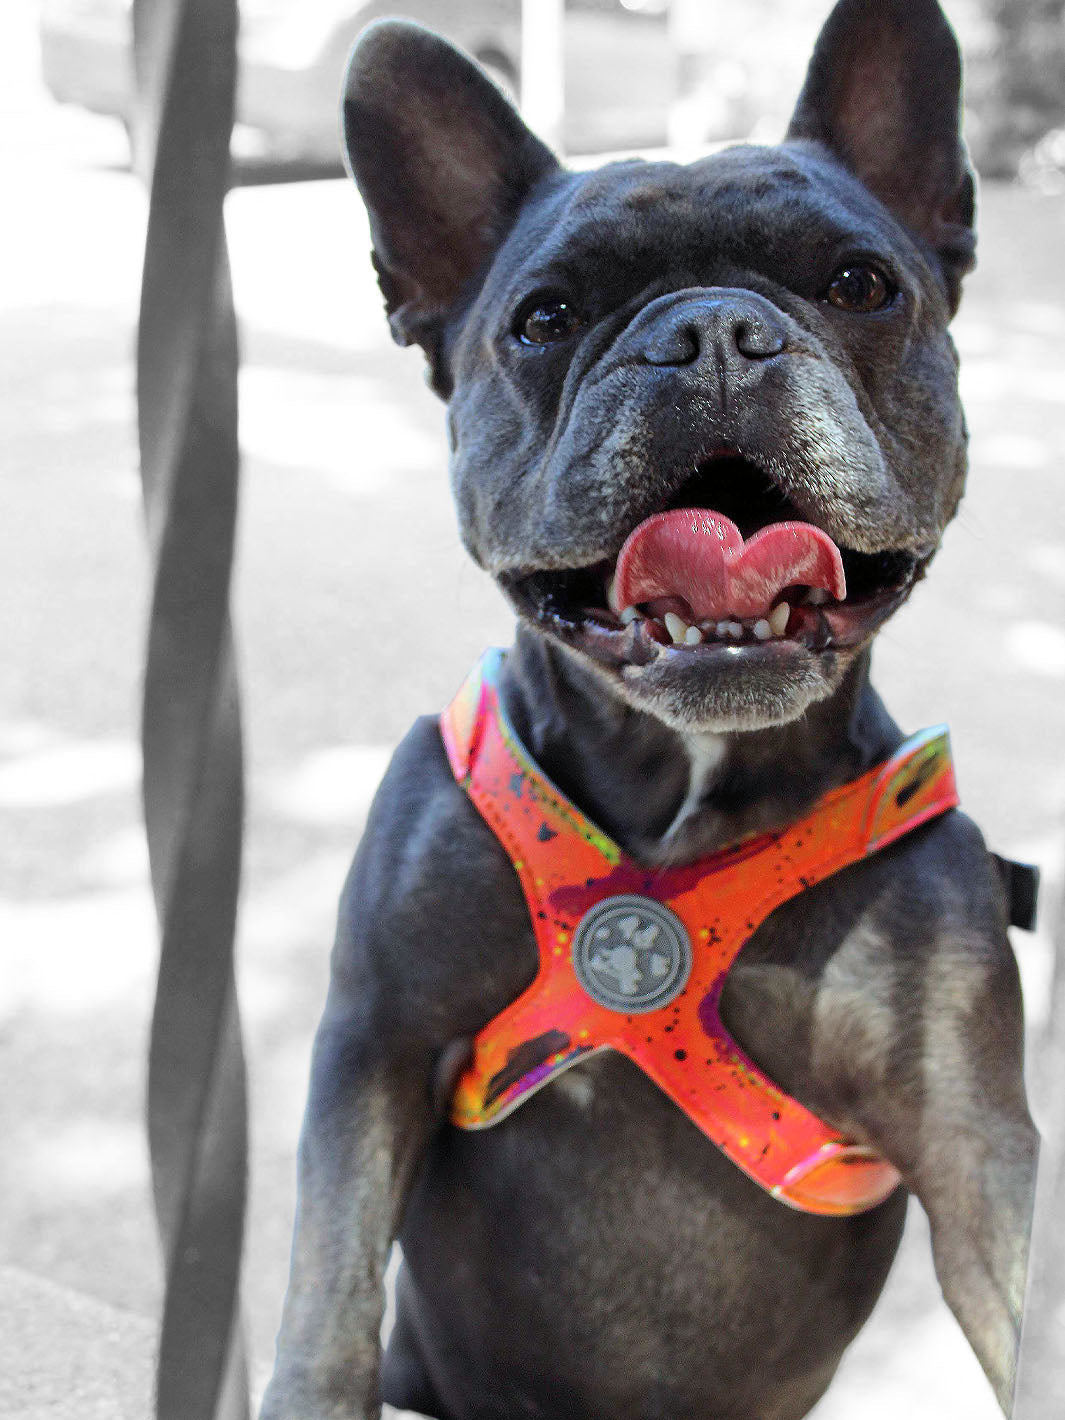 A cute blue frenchie smiling with white teeth and wearing a limited edition french bulldog harness.